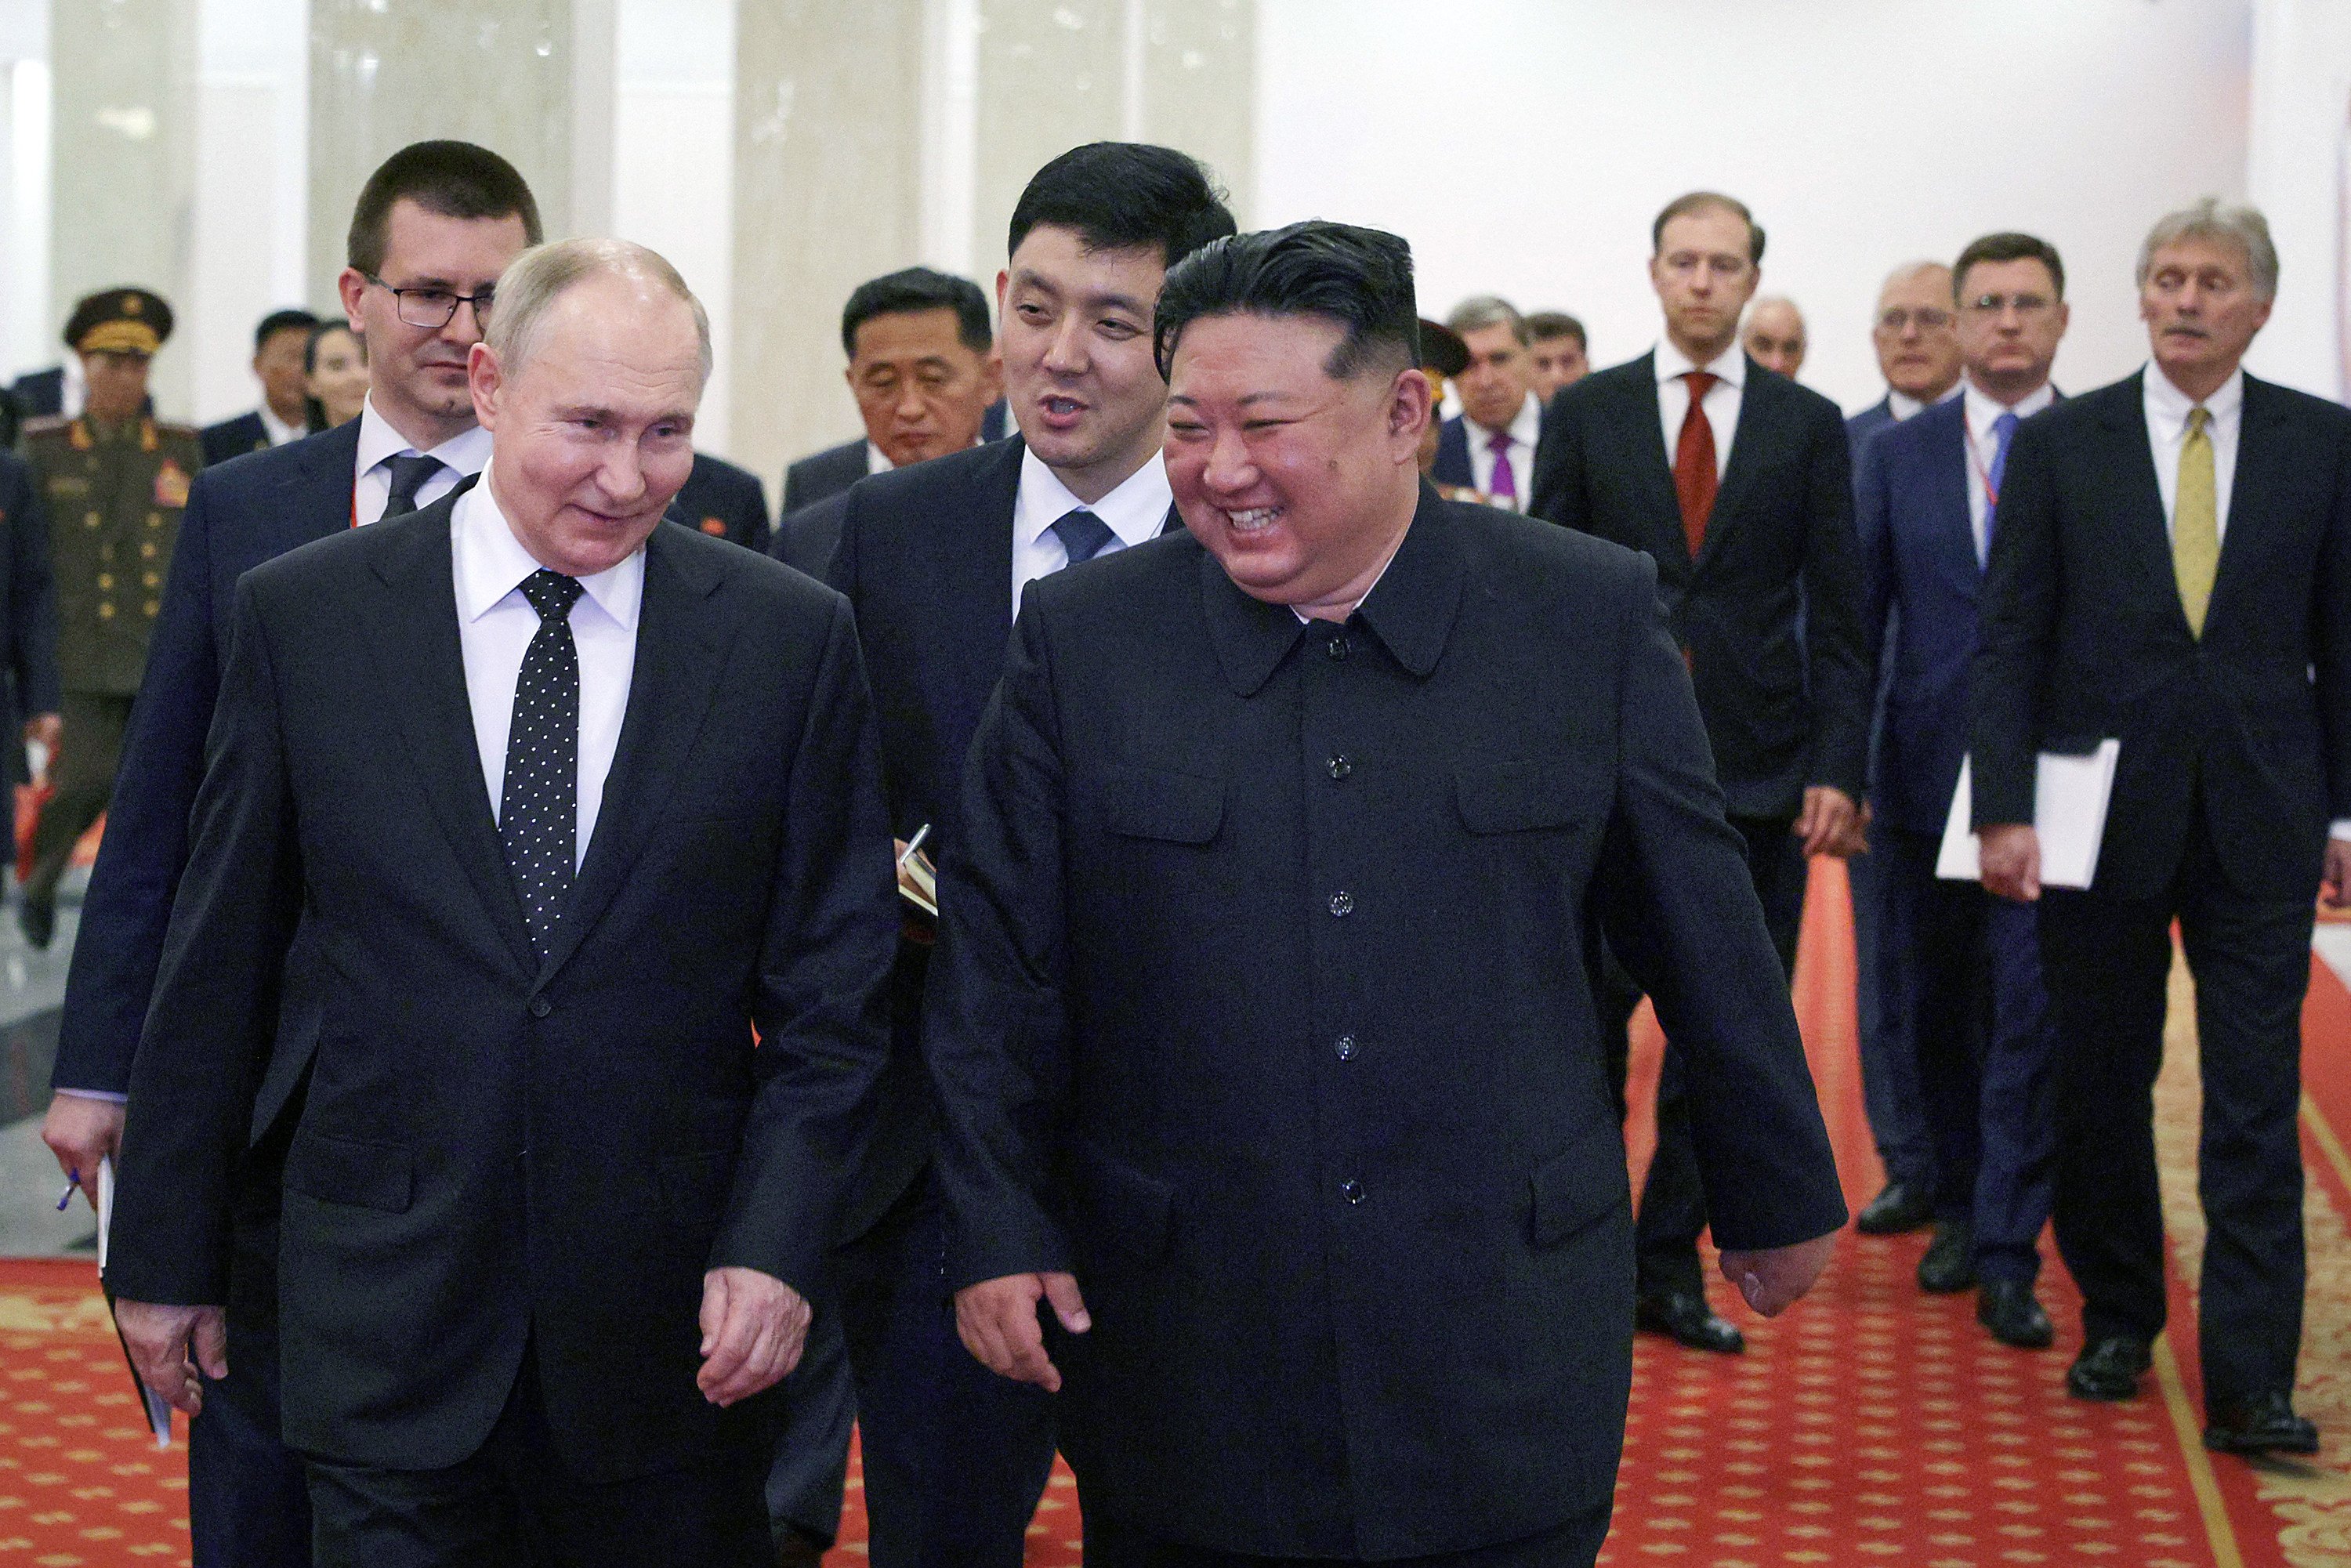 Russian President Vladimir Putin and North Korea’s Kim Jong-un attend a Gala concert in Pyongyang on June 19. Photo: AFP/Getty Images/TNS